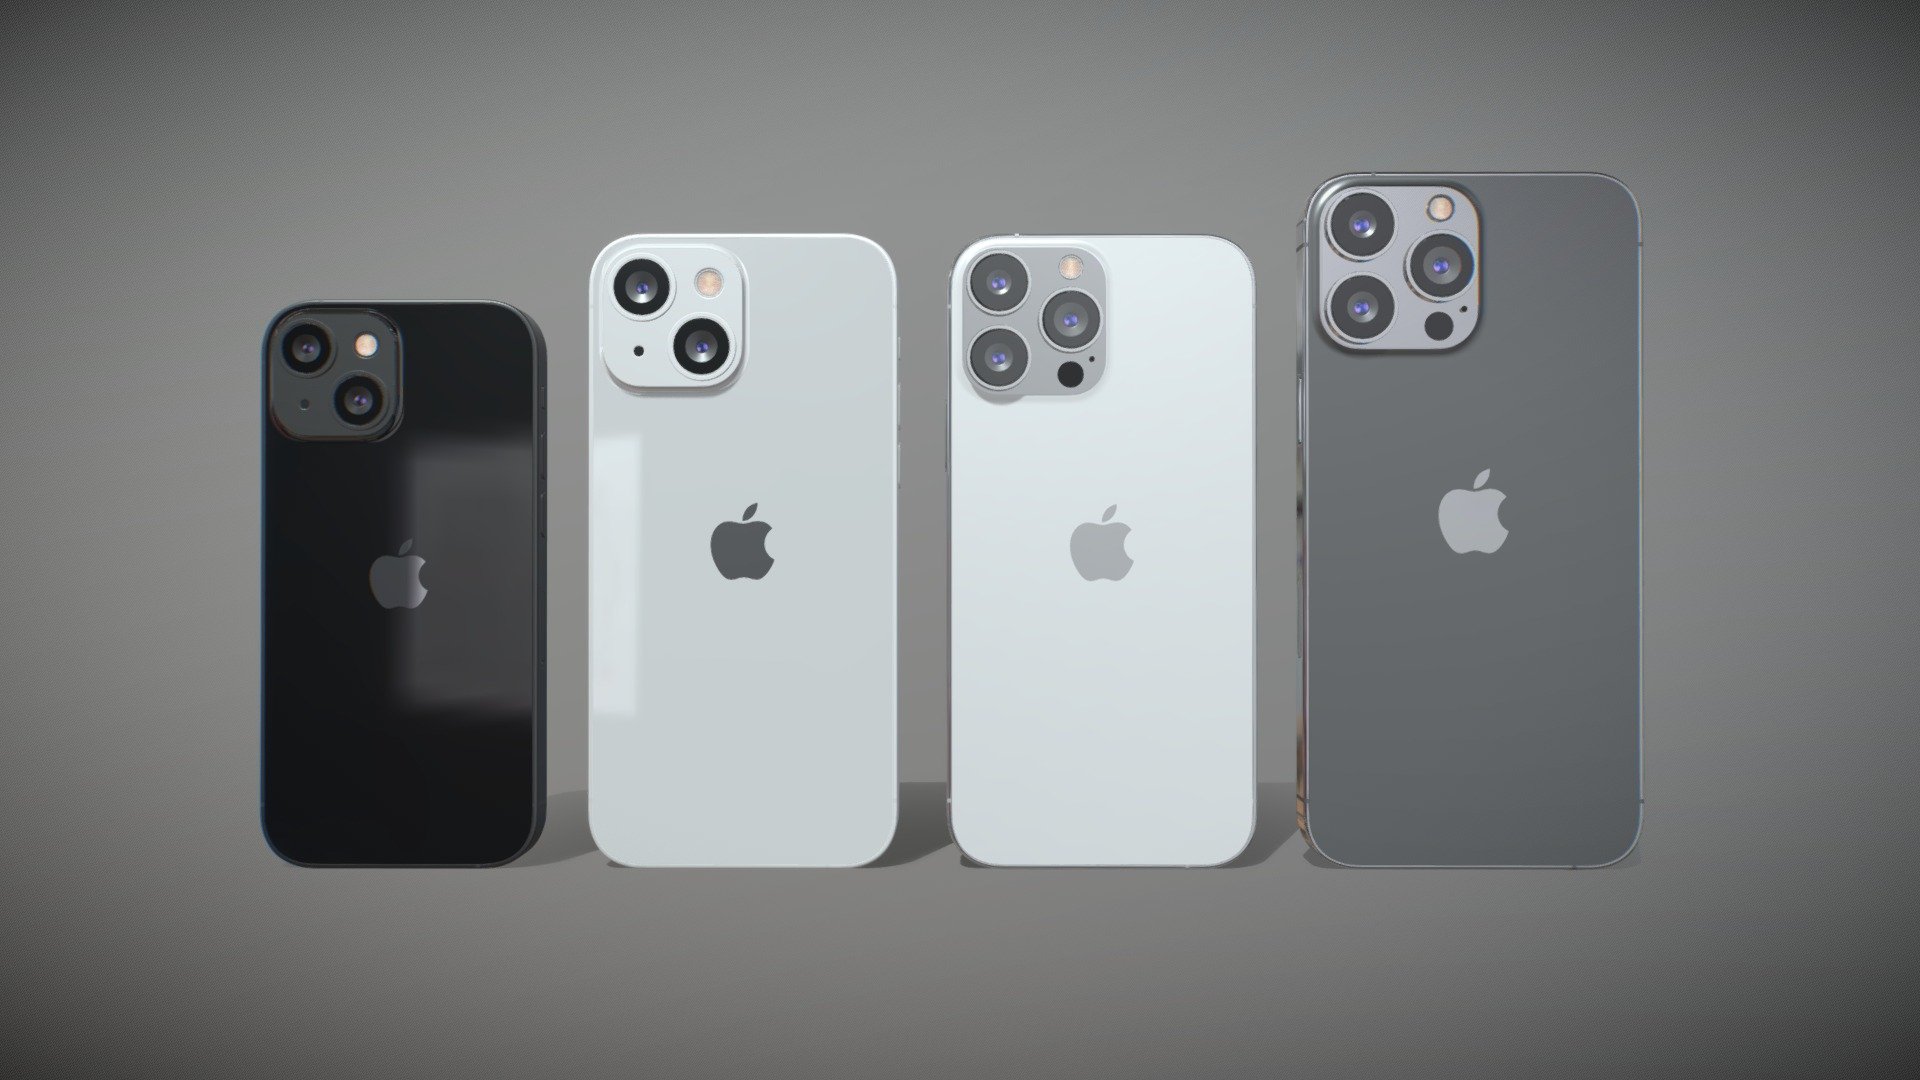 Realistic (copy) 3d model Apple iPhone 13 mini  and 13 and 13 pro and 13 pro MAX.

This set:
- 1 file obj standard
- 1 file 3ds Max 2013 vray material 
- 1 file 3ds Max 2013 corona material
- 4 file of 3Ds
- 4 file e3d full set of materials.
- 4 file cinema 4d standard.
- 4 file blender cycles.

Topology of geometry:
- forms and proportions of The 3D model
- the geometry of the model was created very neatly
- there are no many-sided polygons
- detailed enough for close-up renders
- the model optimized for turbosmooth modifier
- Not collapsed the turbosmooth modified
- apply the Smooth modifier with a parameter to get the desired level of detail

Materials and Textures:
- 3ds max files included Vray-Shaders
- 3ds max files included Corona-Shaders
- all texture paths are cleared

Organization of scene:
- to all objects and materials
- real world size (system units - mm)
- coordinates of location of the model in space (x0, y0, z0)
- does not contain extraneous or hidden objects (lights, cameras, shapes etc.) - iPhone 13 mini and 13 and 13 pro and 13 pro MAX - Buy Royalty Free 3D model by madMIX 3d model